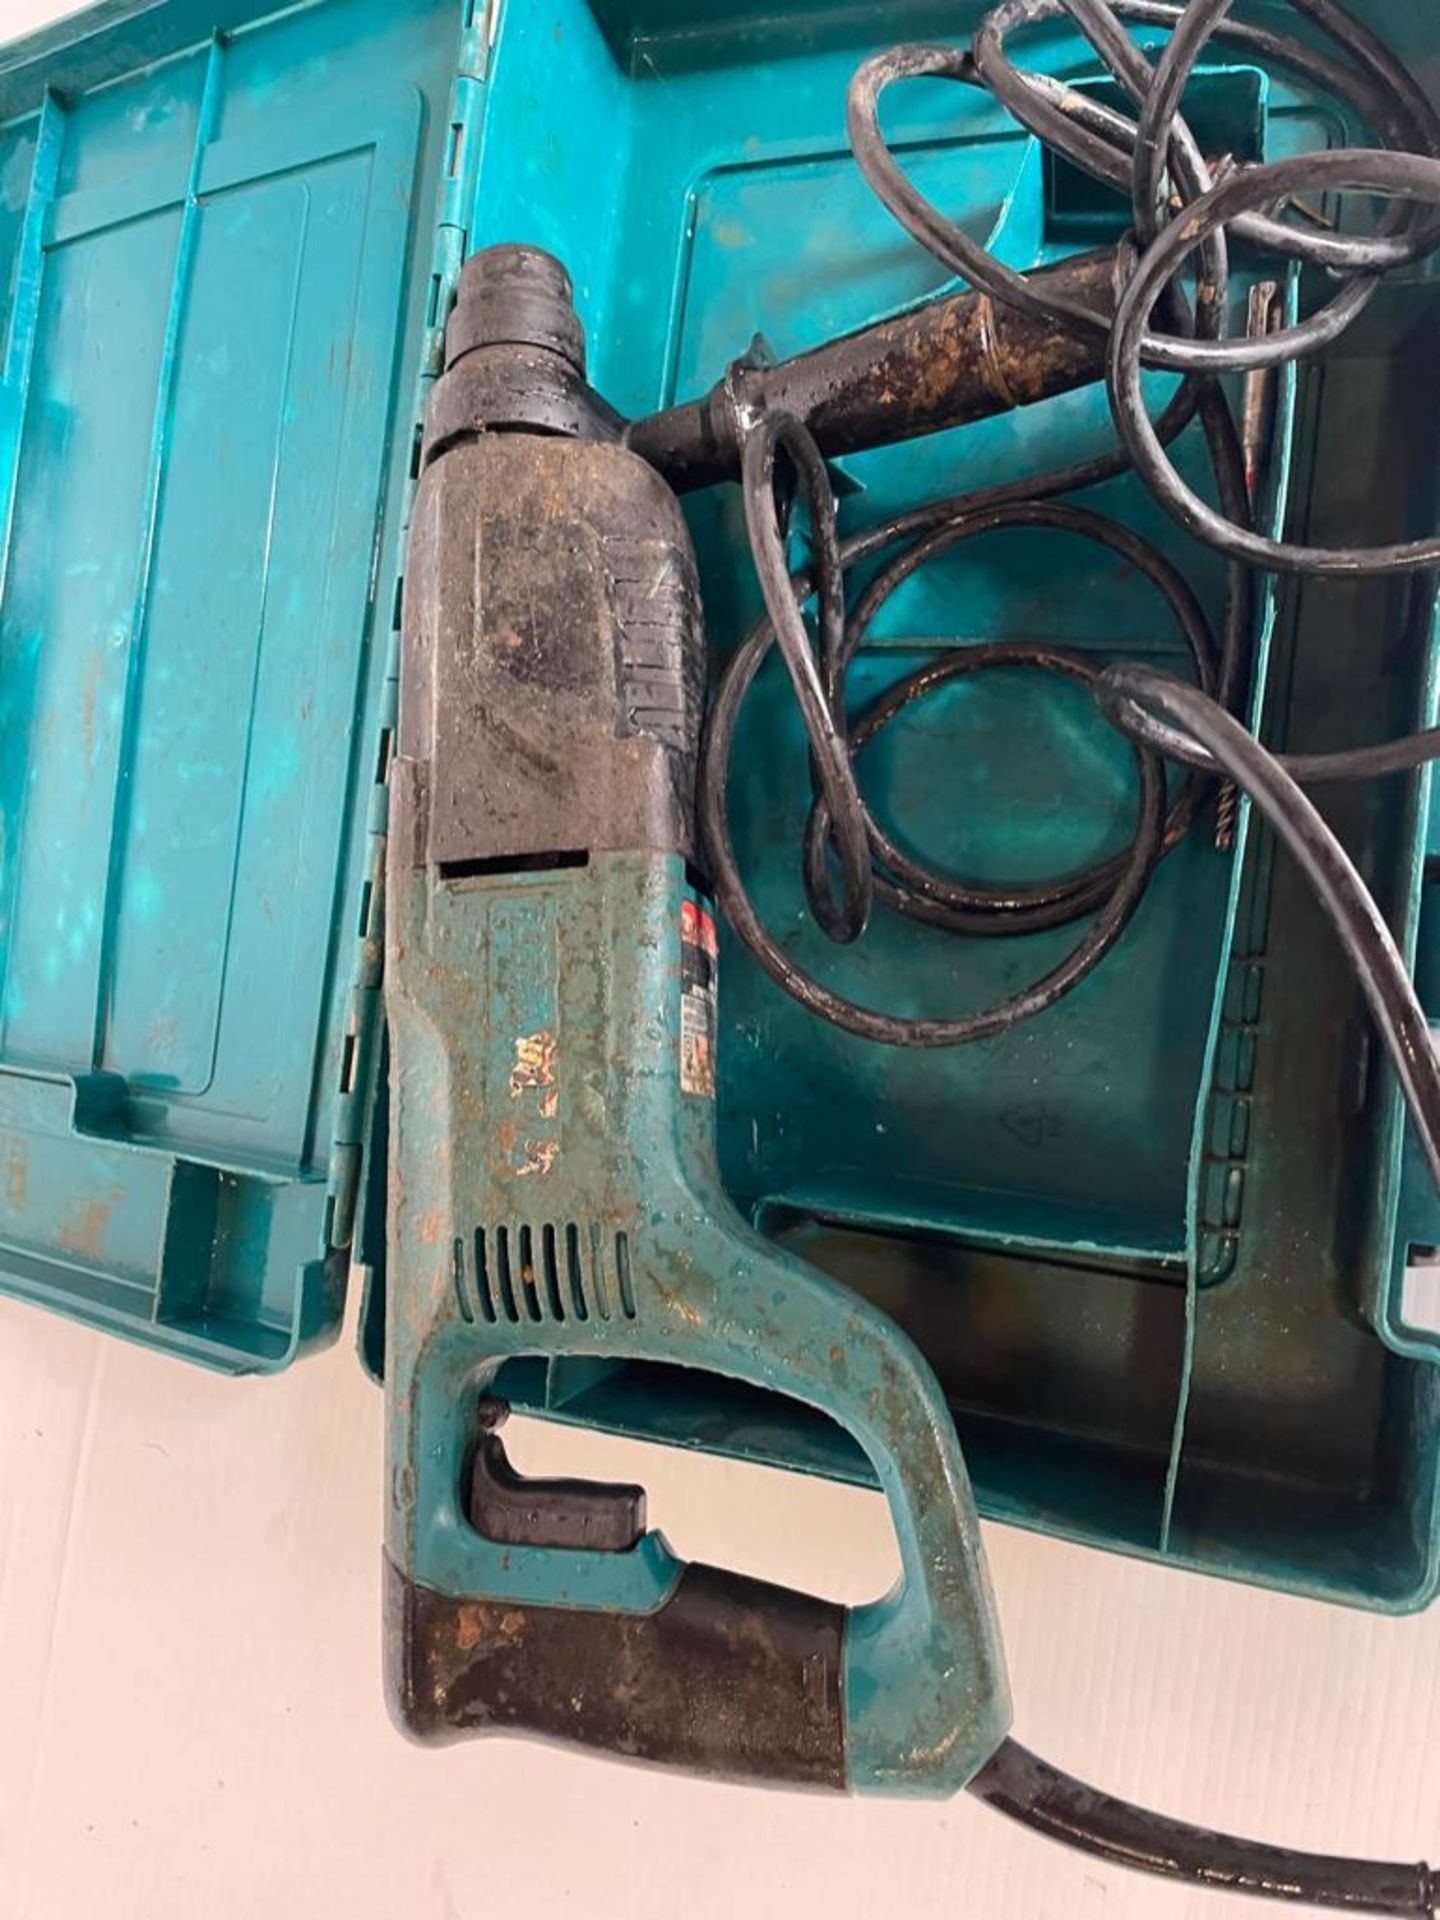 Makita HR2455 Hammer Drill, 120V. Located in Hazelwood, MO - Image 3 of 4